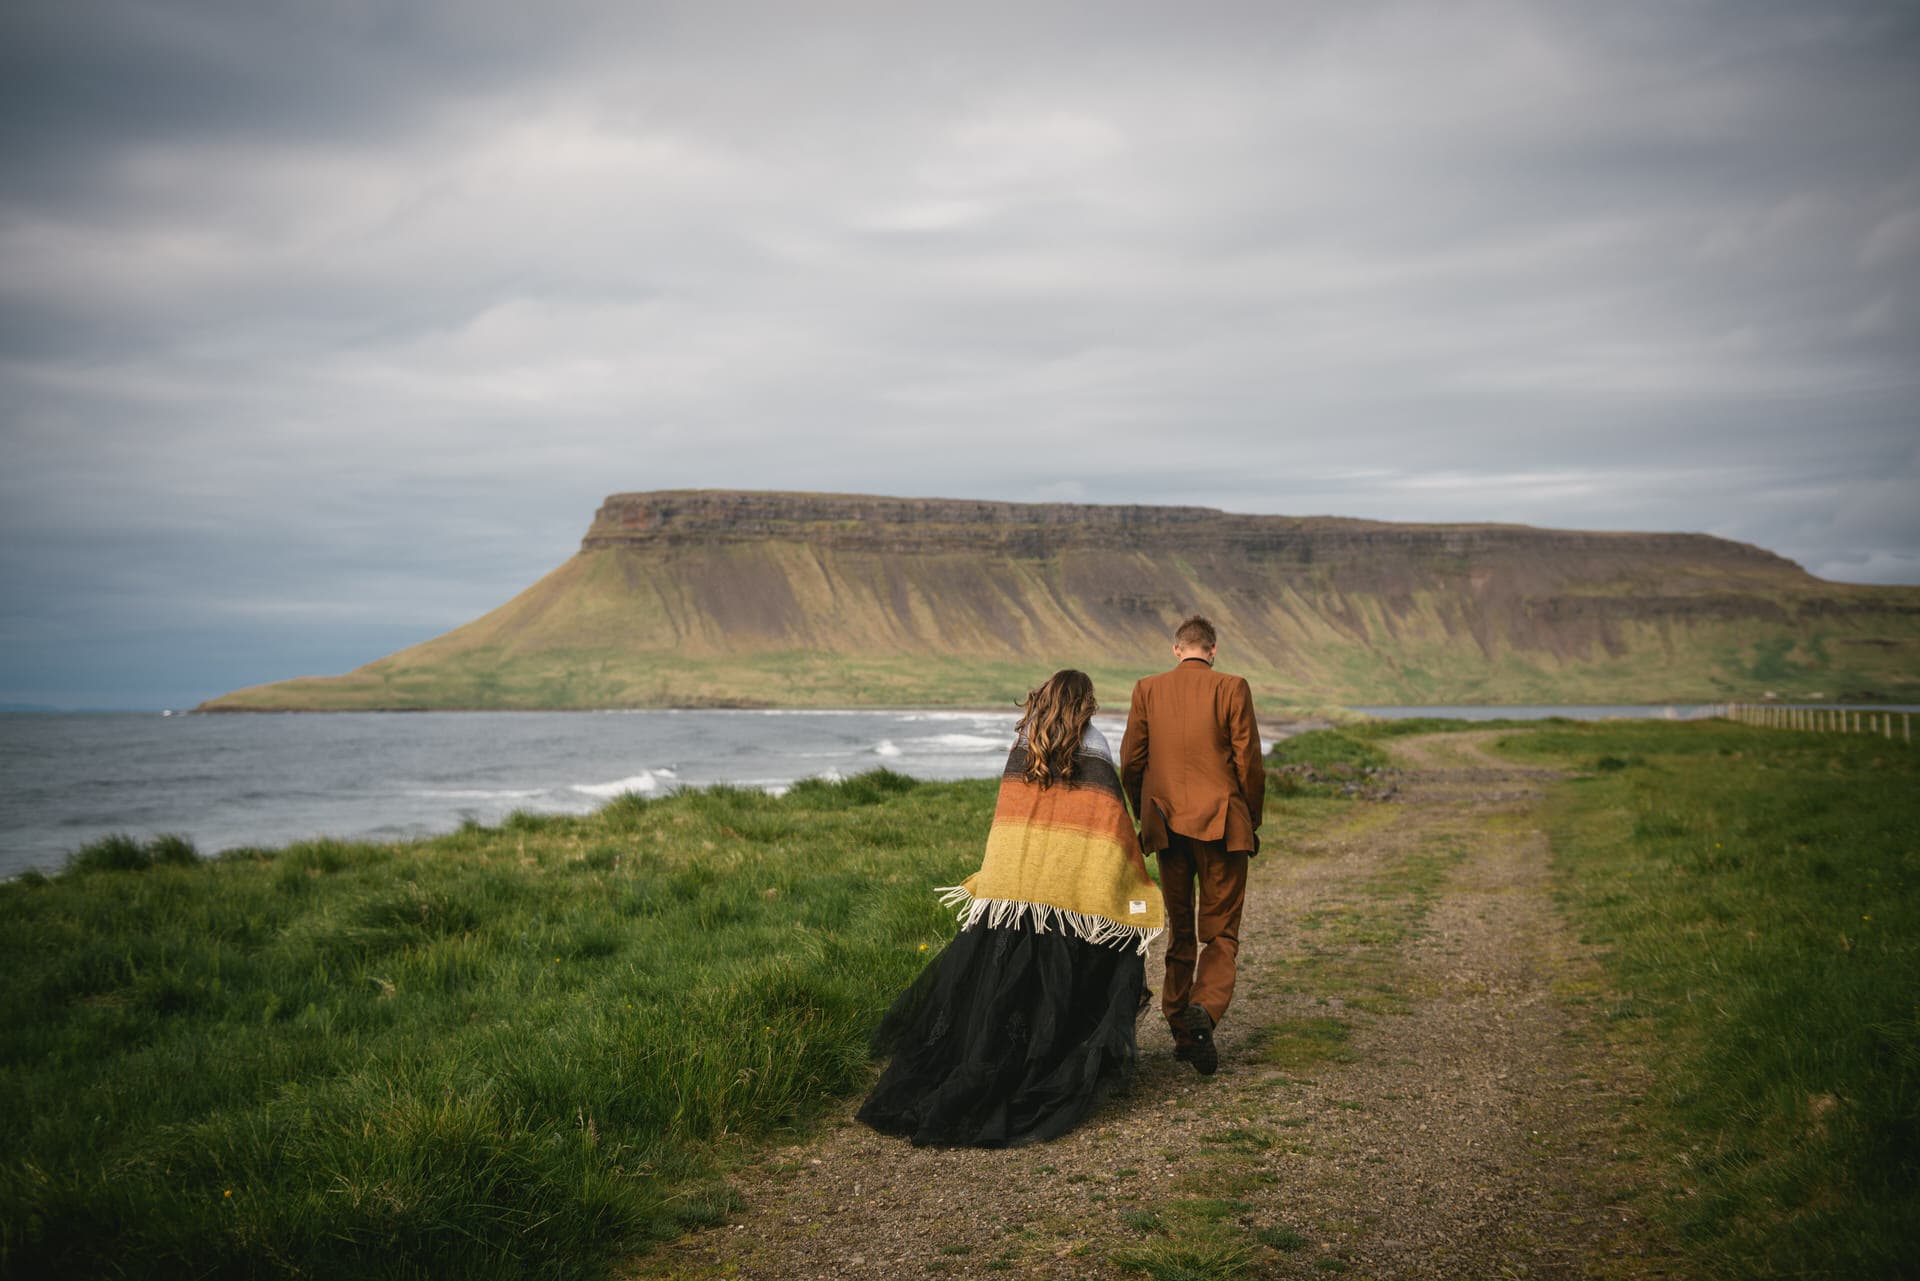 A joyful twirl on the black sand beach, surrounded by the mystique of the Westfjords.